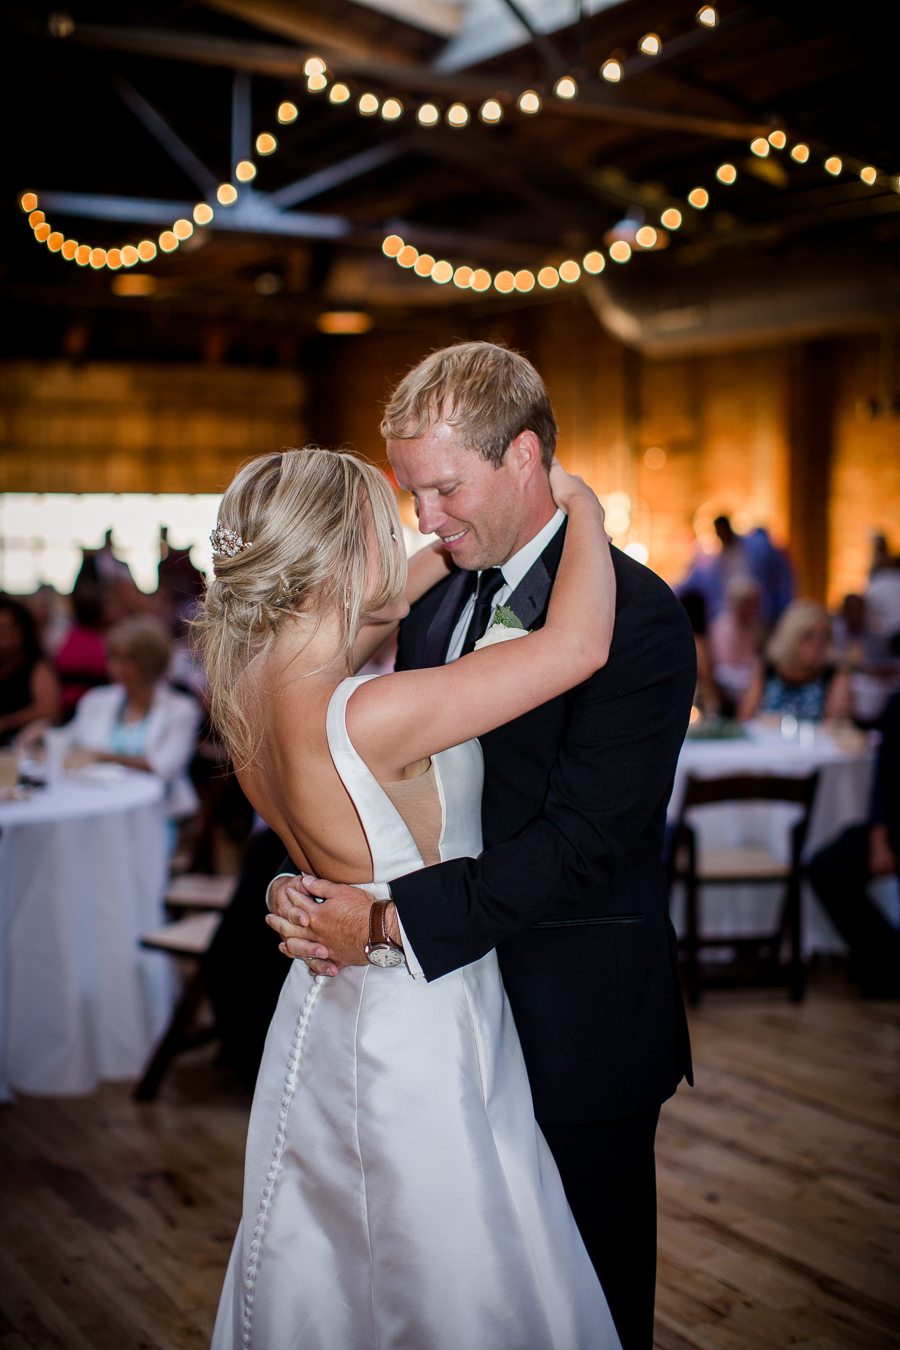 First dance at this wedding at The Standard by Knoxville Wedding Photographer, Amanda May Photos.